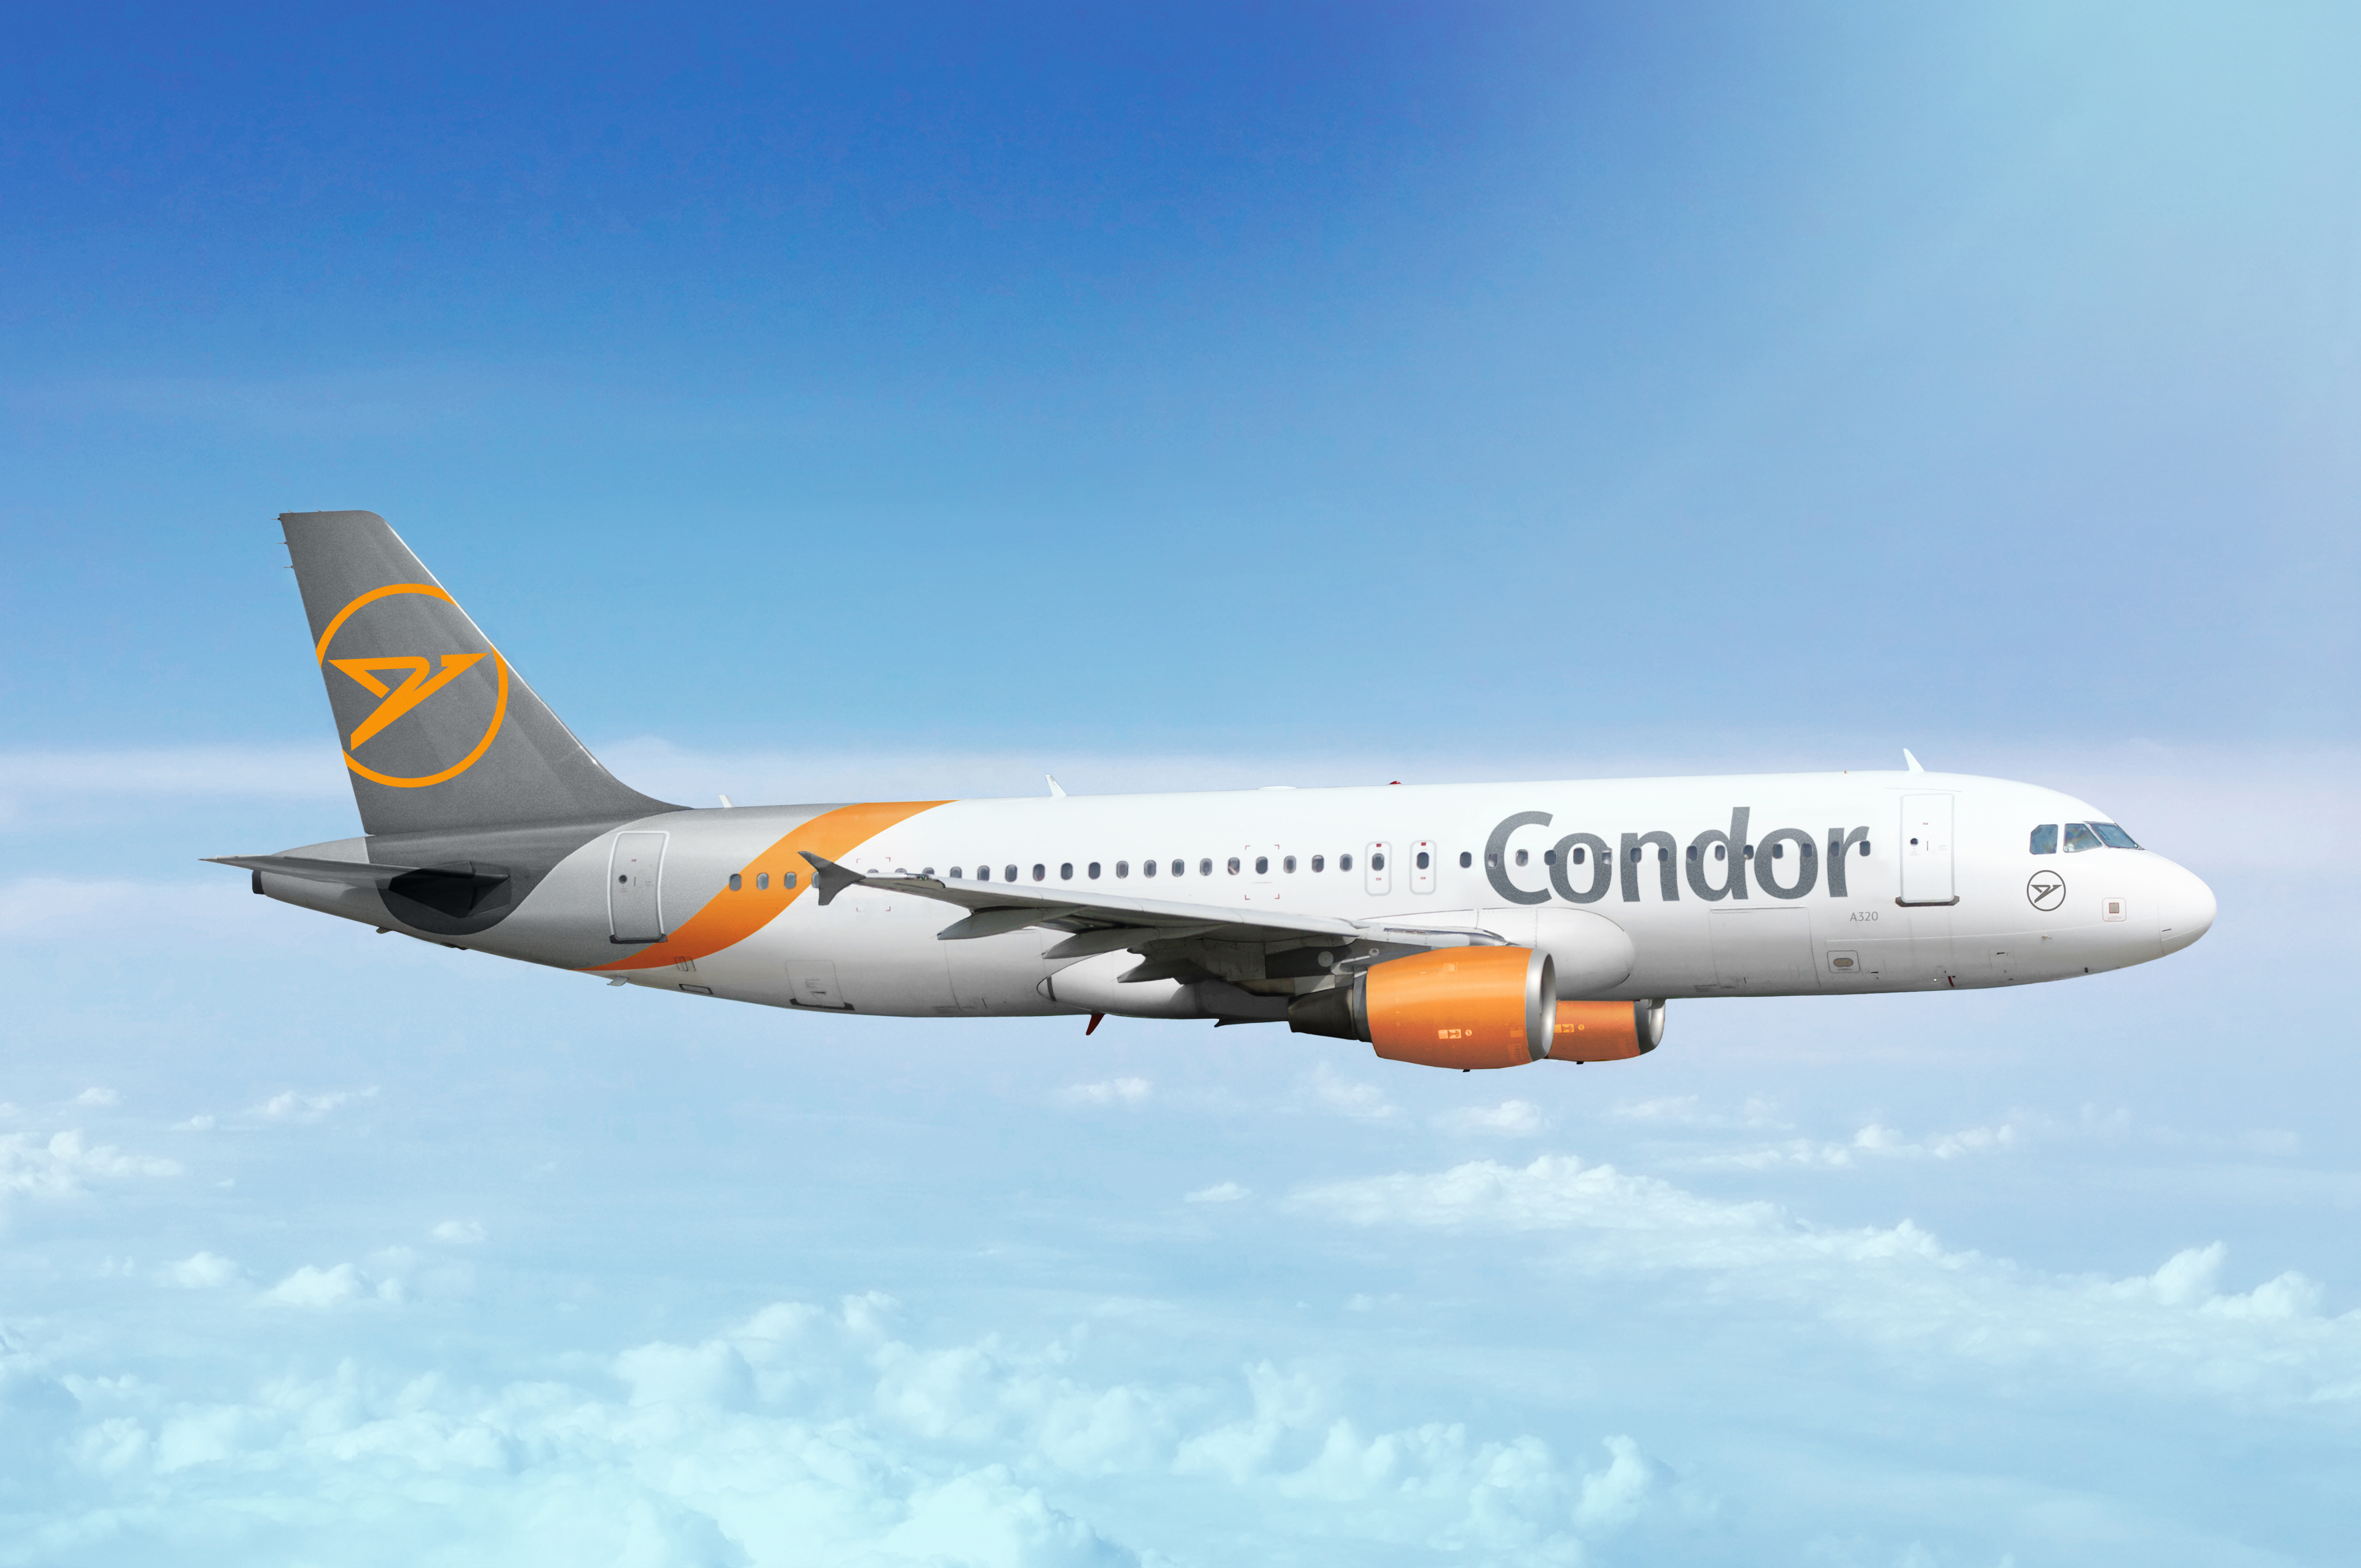 Condor is bought up by LOT Polish Airlines